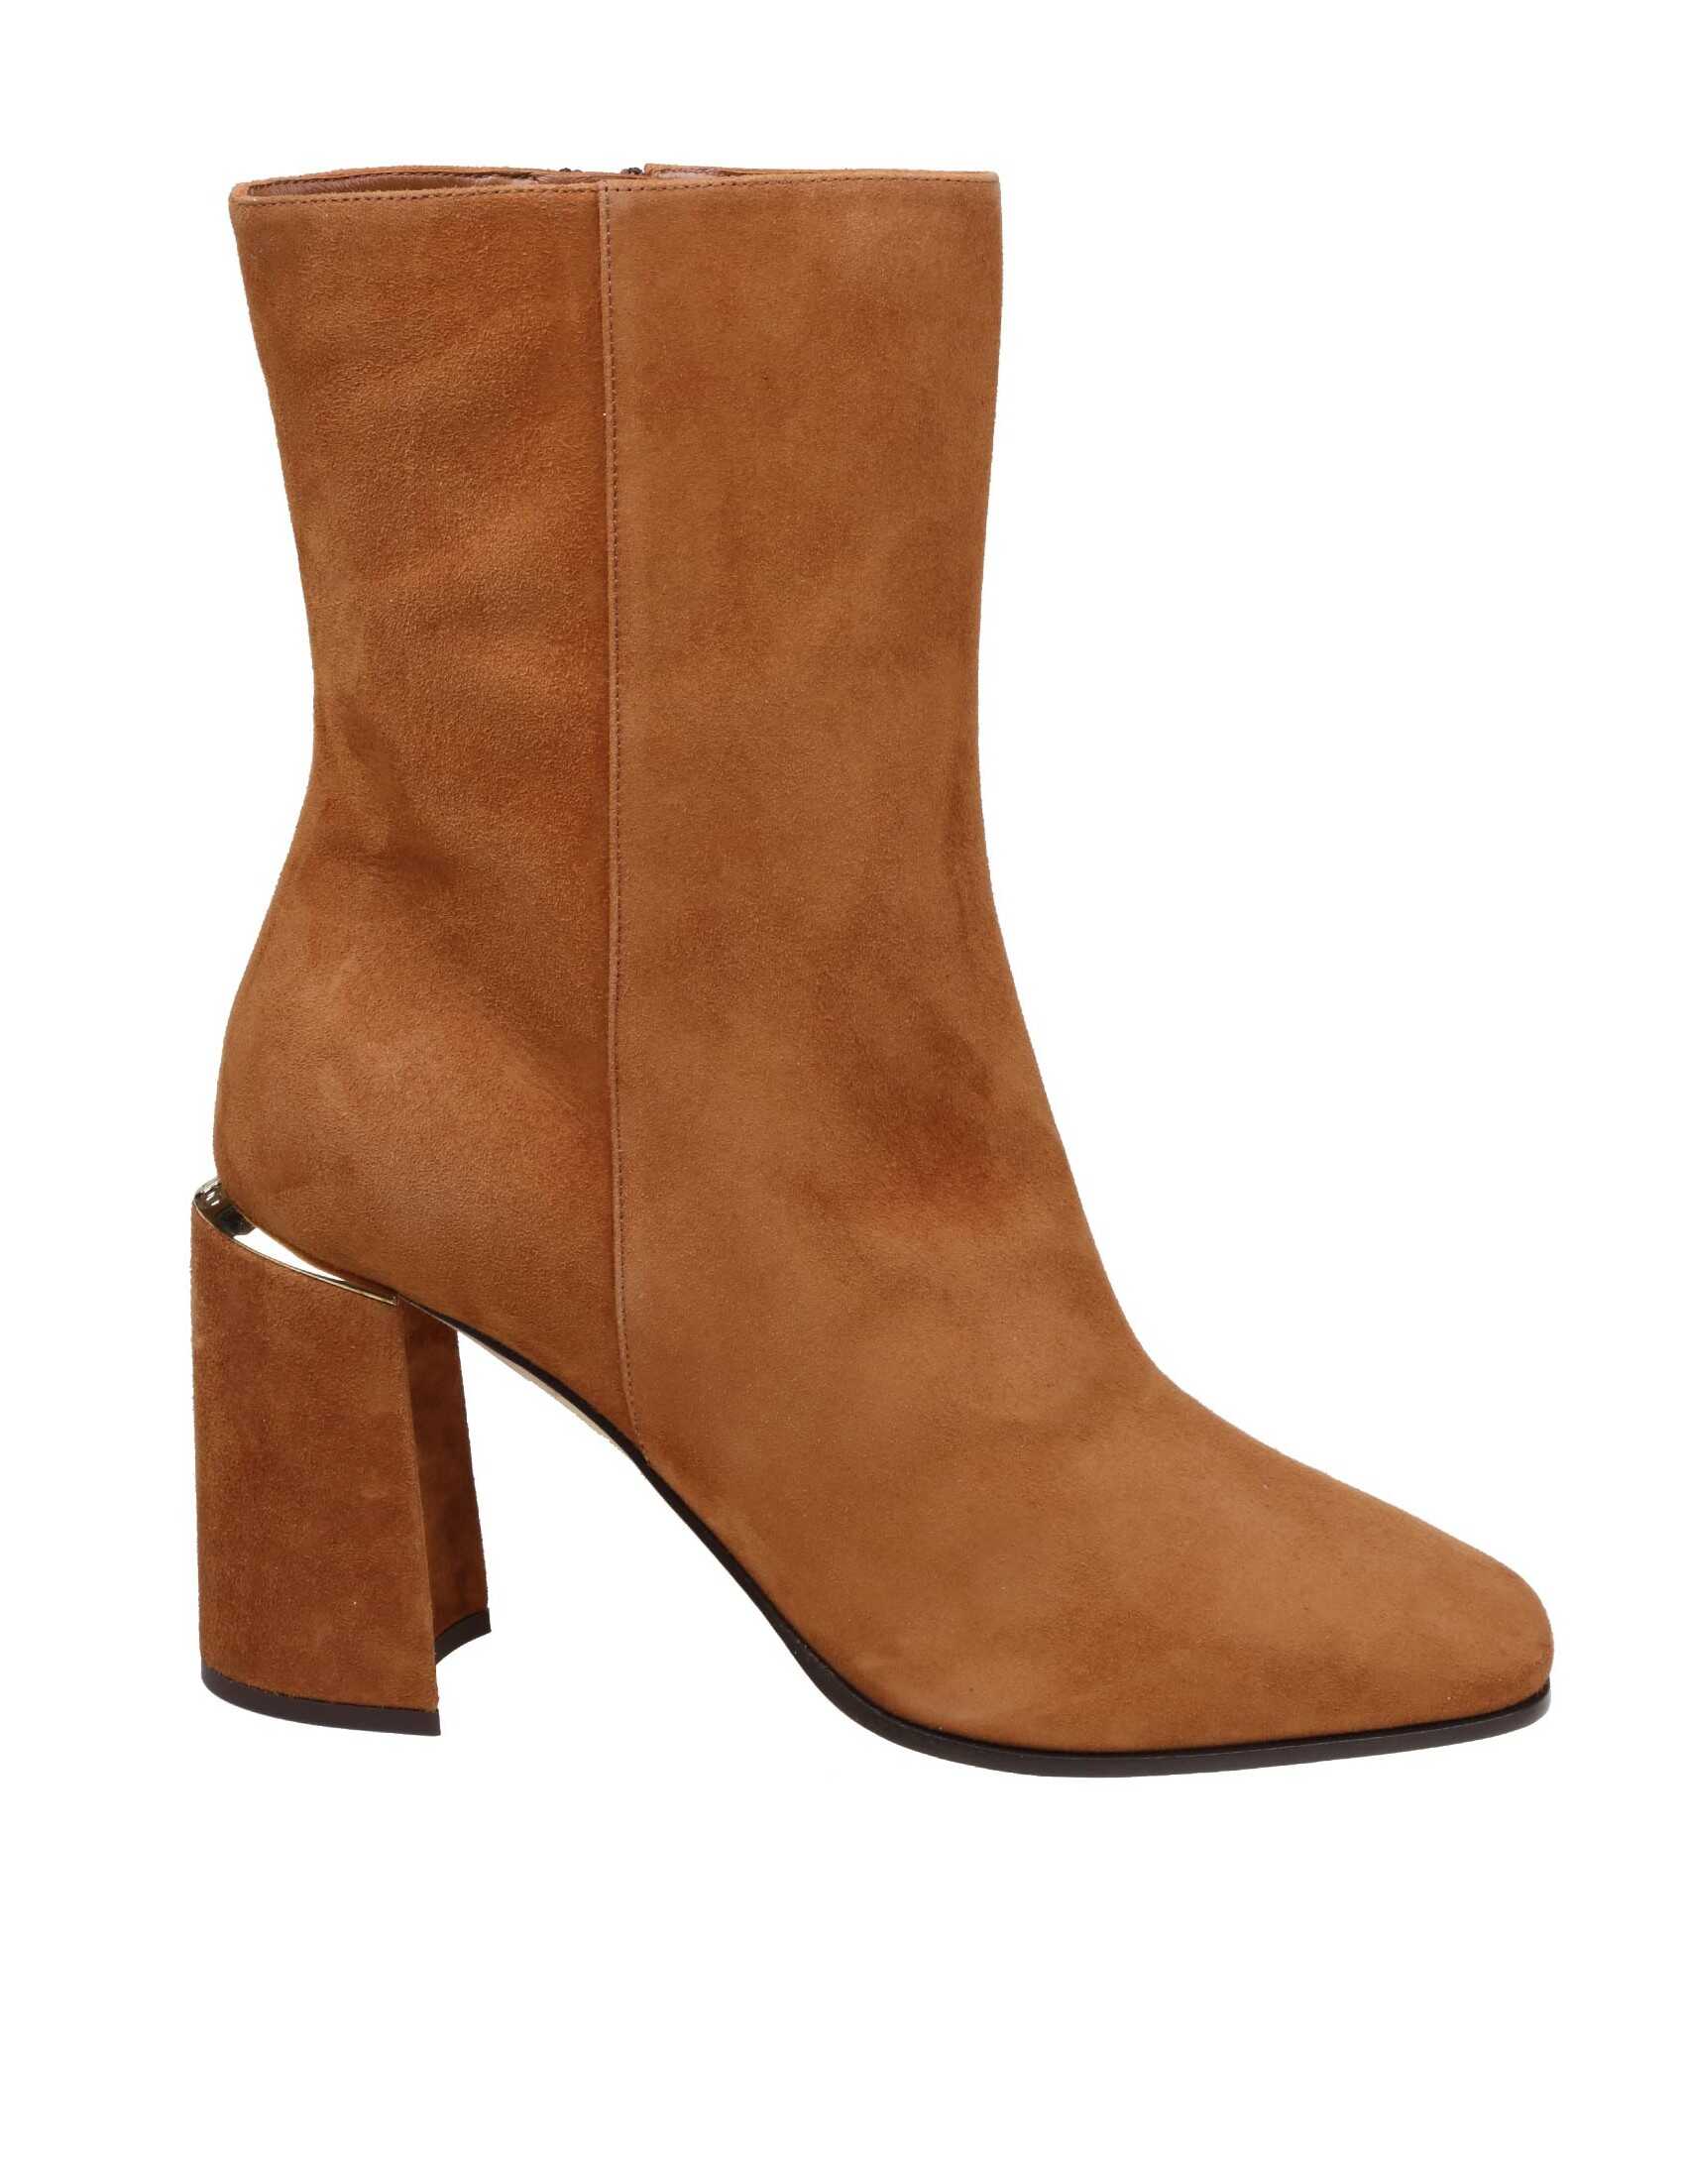 Jimmy Choo Jimmy choo loren ab 85 ankle boots in tan color suede Brown